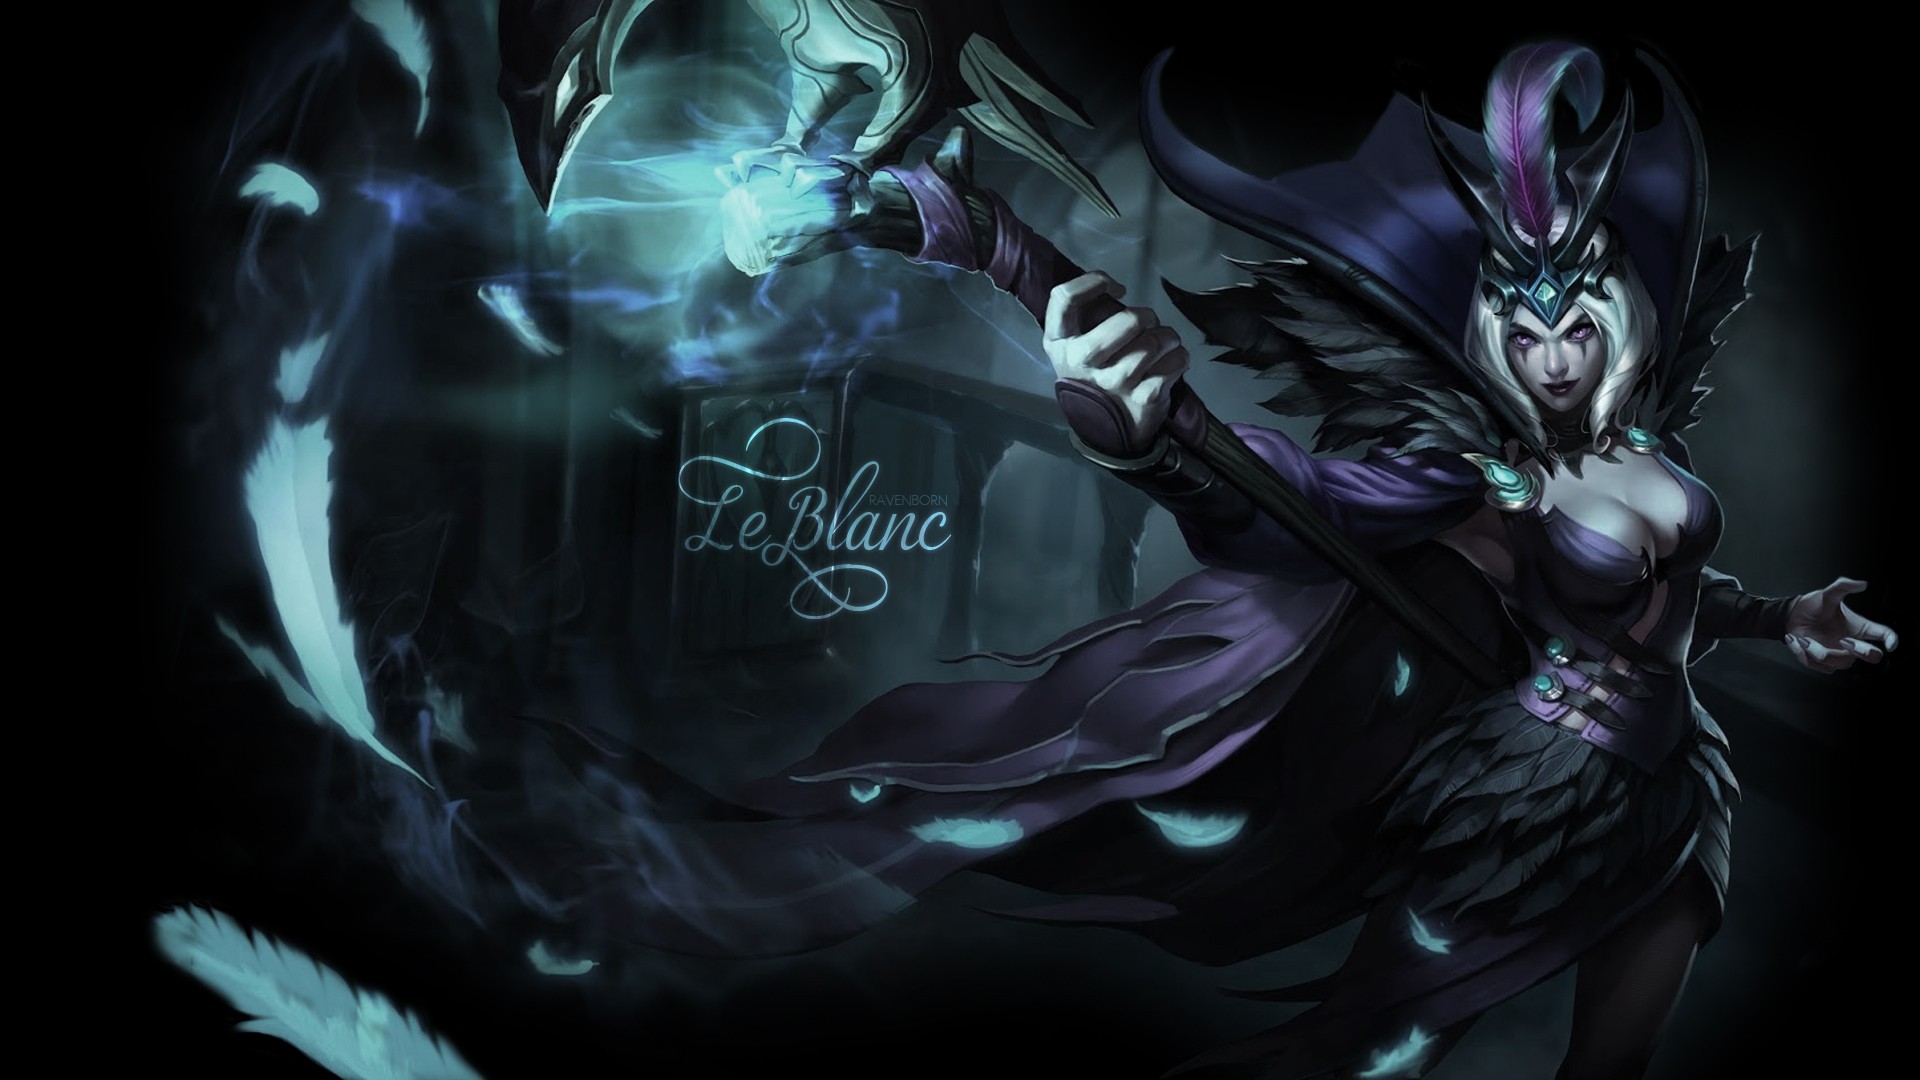 General 1920x1080 video games video game girls magician staff League of Legends LeBlanc (League of Legends) cleavage boobs PC gaming fantasy art fantasy girl